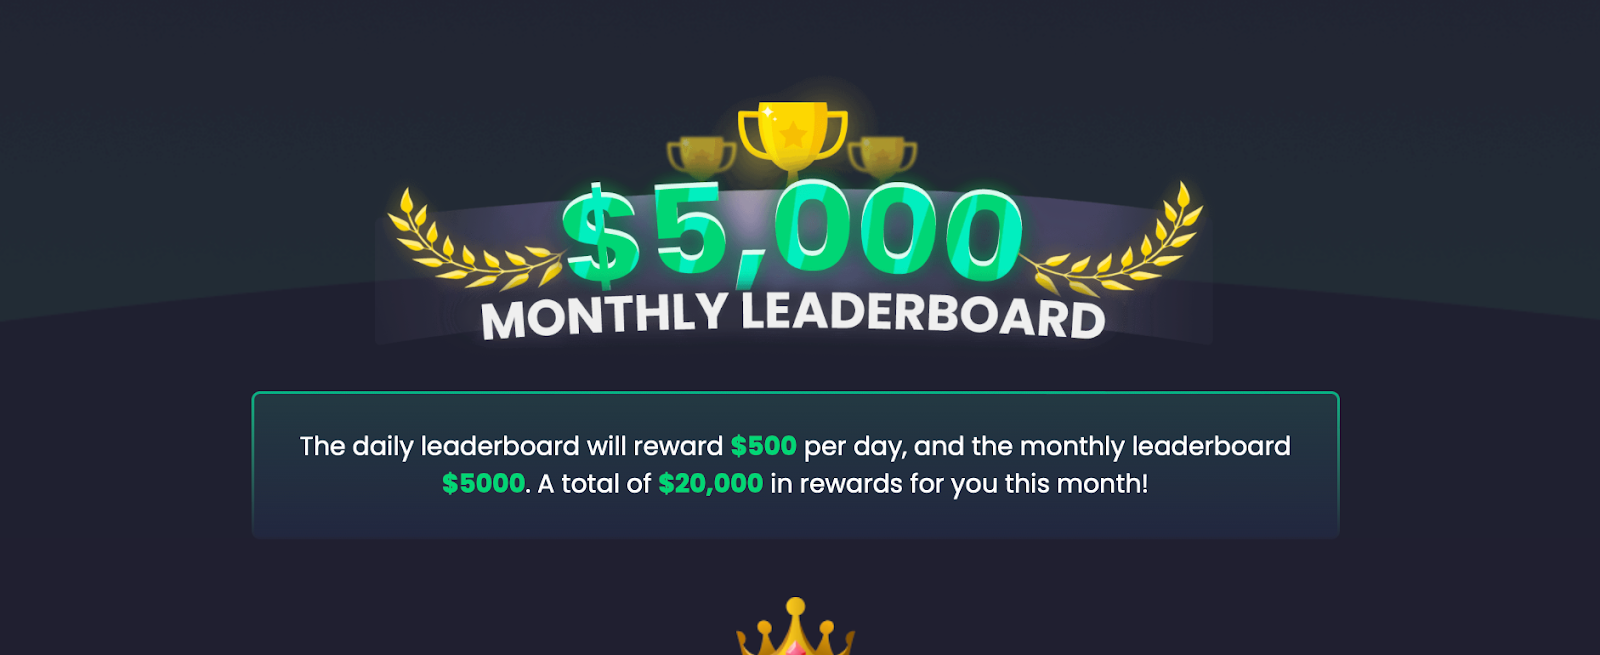 Freecash - Monthly Leaderboard